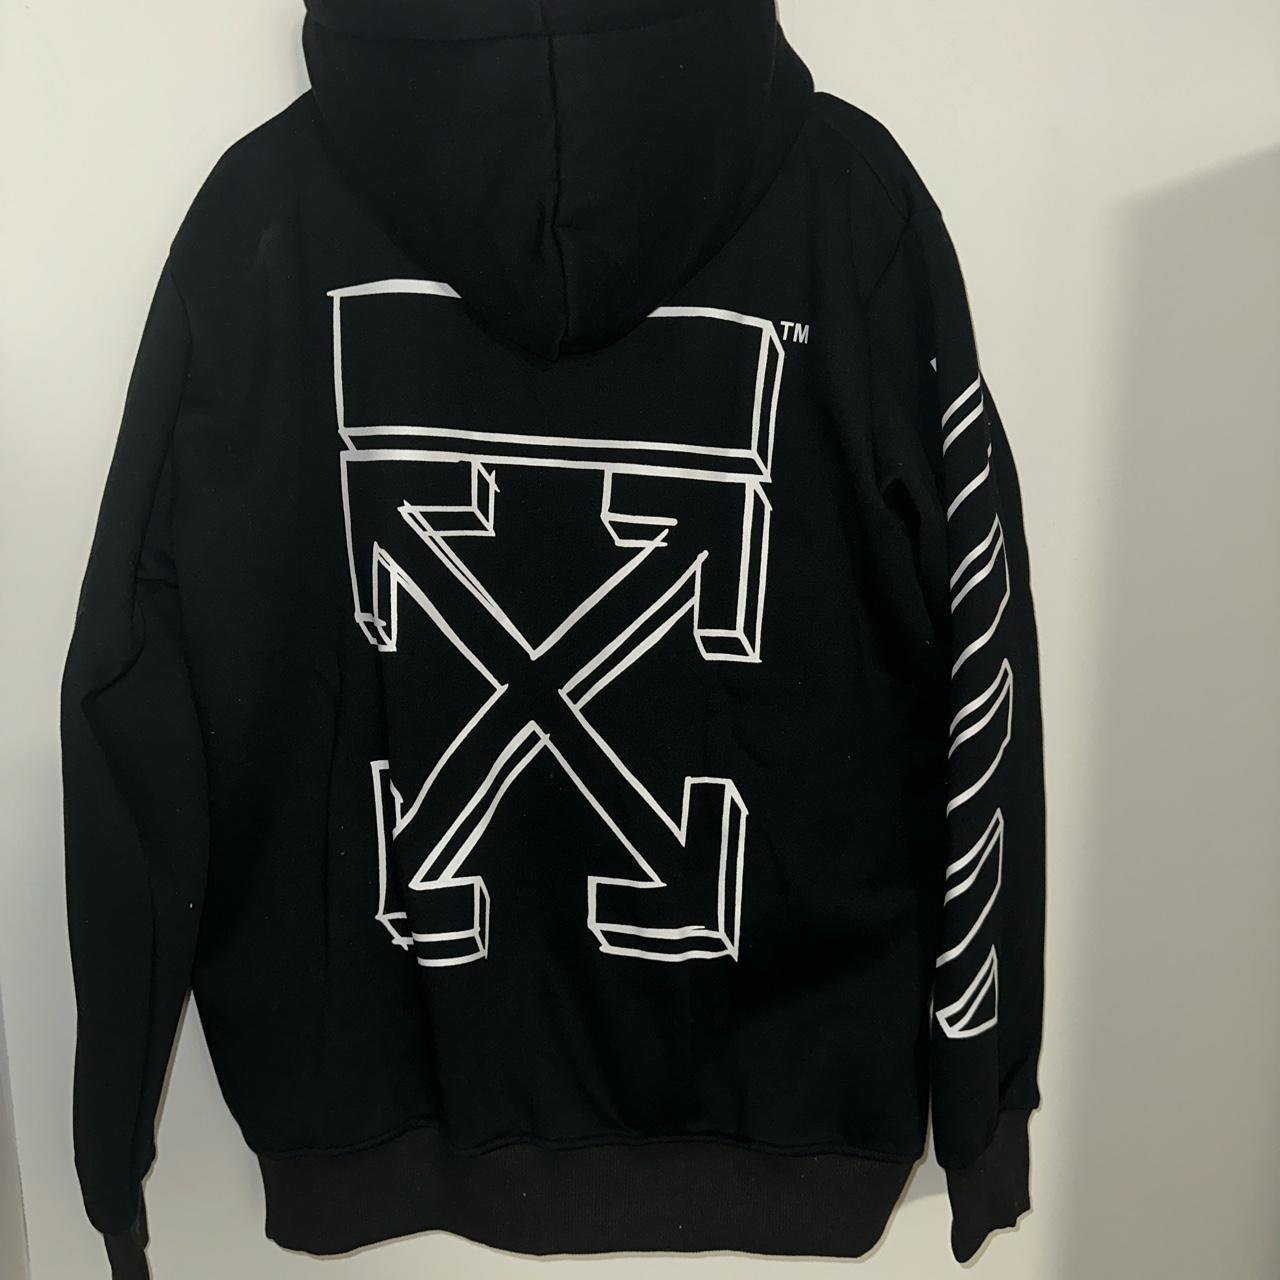 PRICE NEGOTIABLE Off White Black Hoodie Size M Never... - Depop